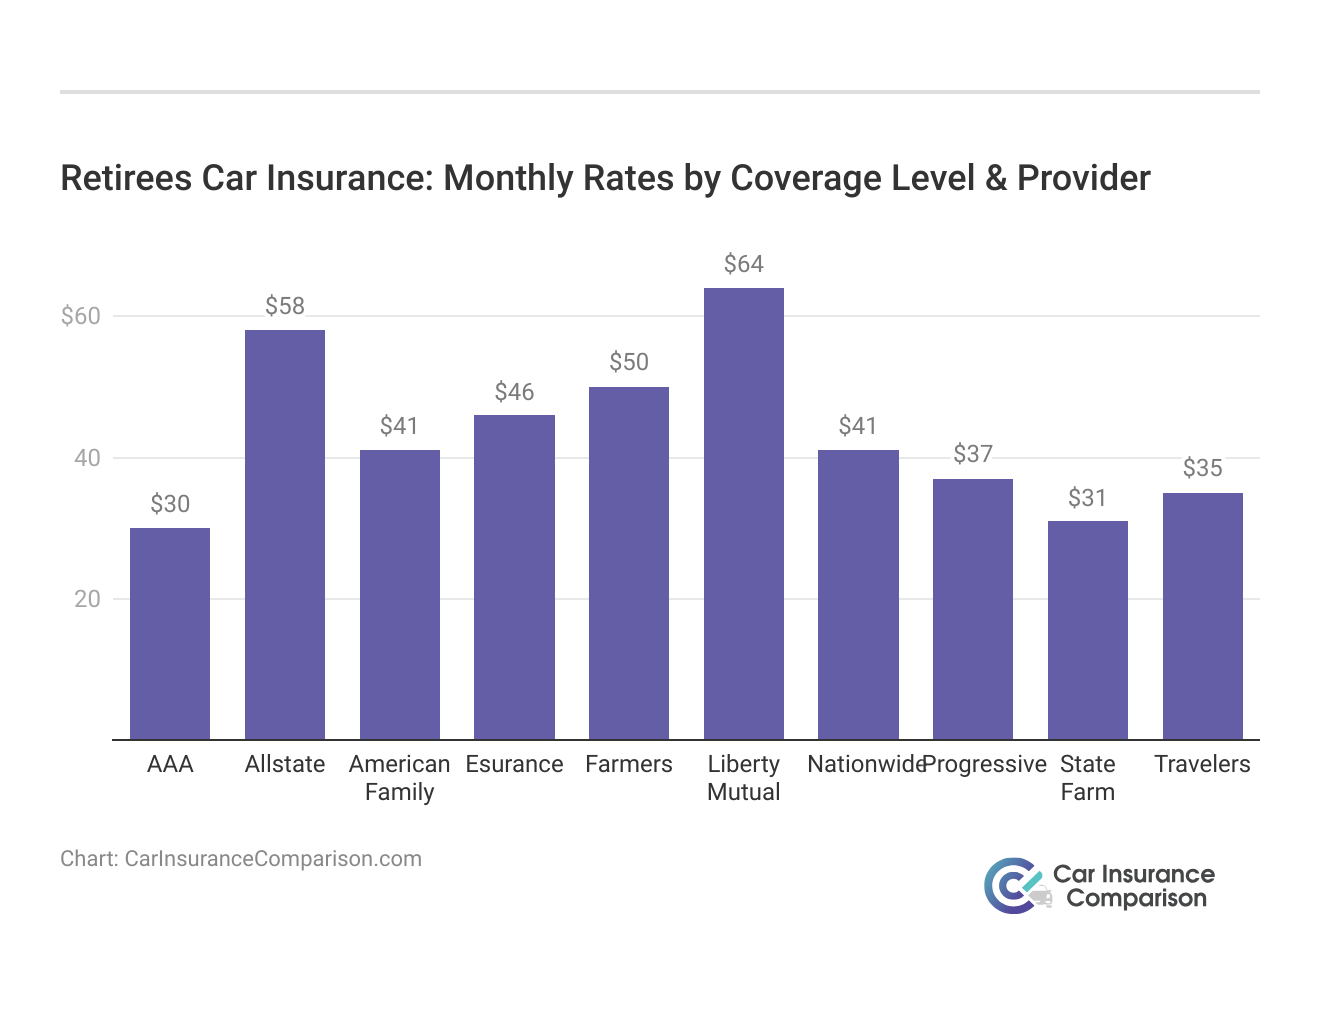 <h3>Retirees Car Insurance: Monthly Rates by Coverage Level & Provider</h3>